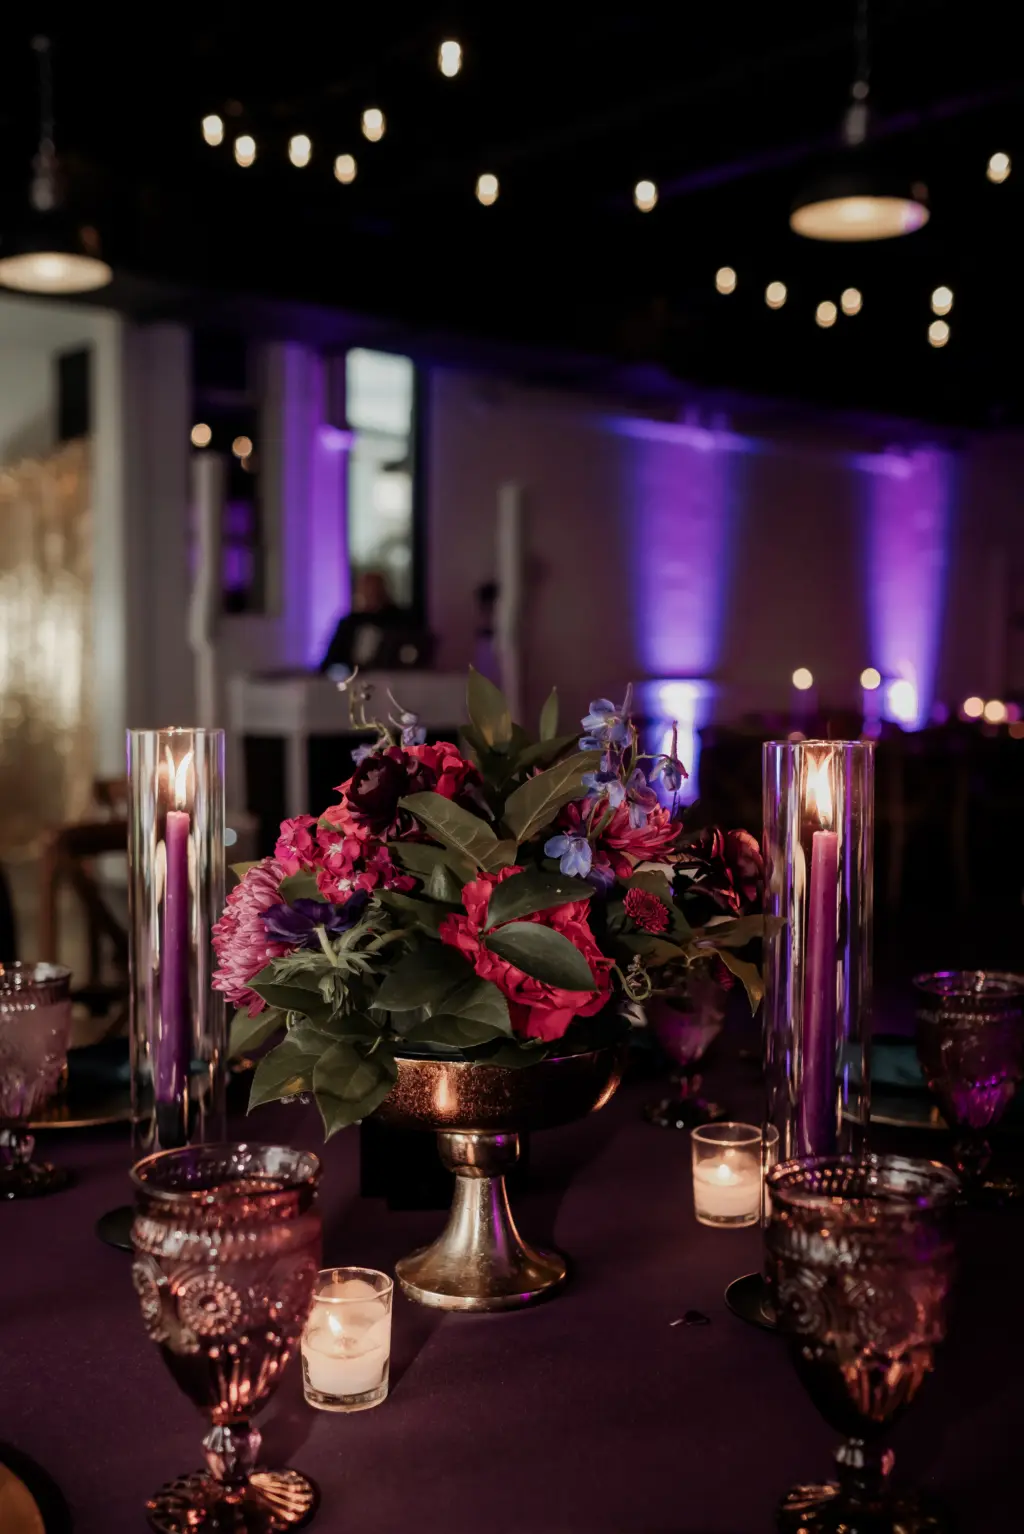 Dark and Moody Wedding Reception Centerpiece Inspiration with Black Pillar Candles and Gold Accents